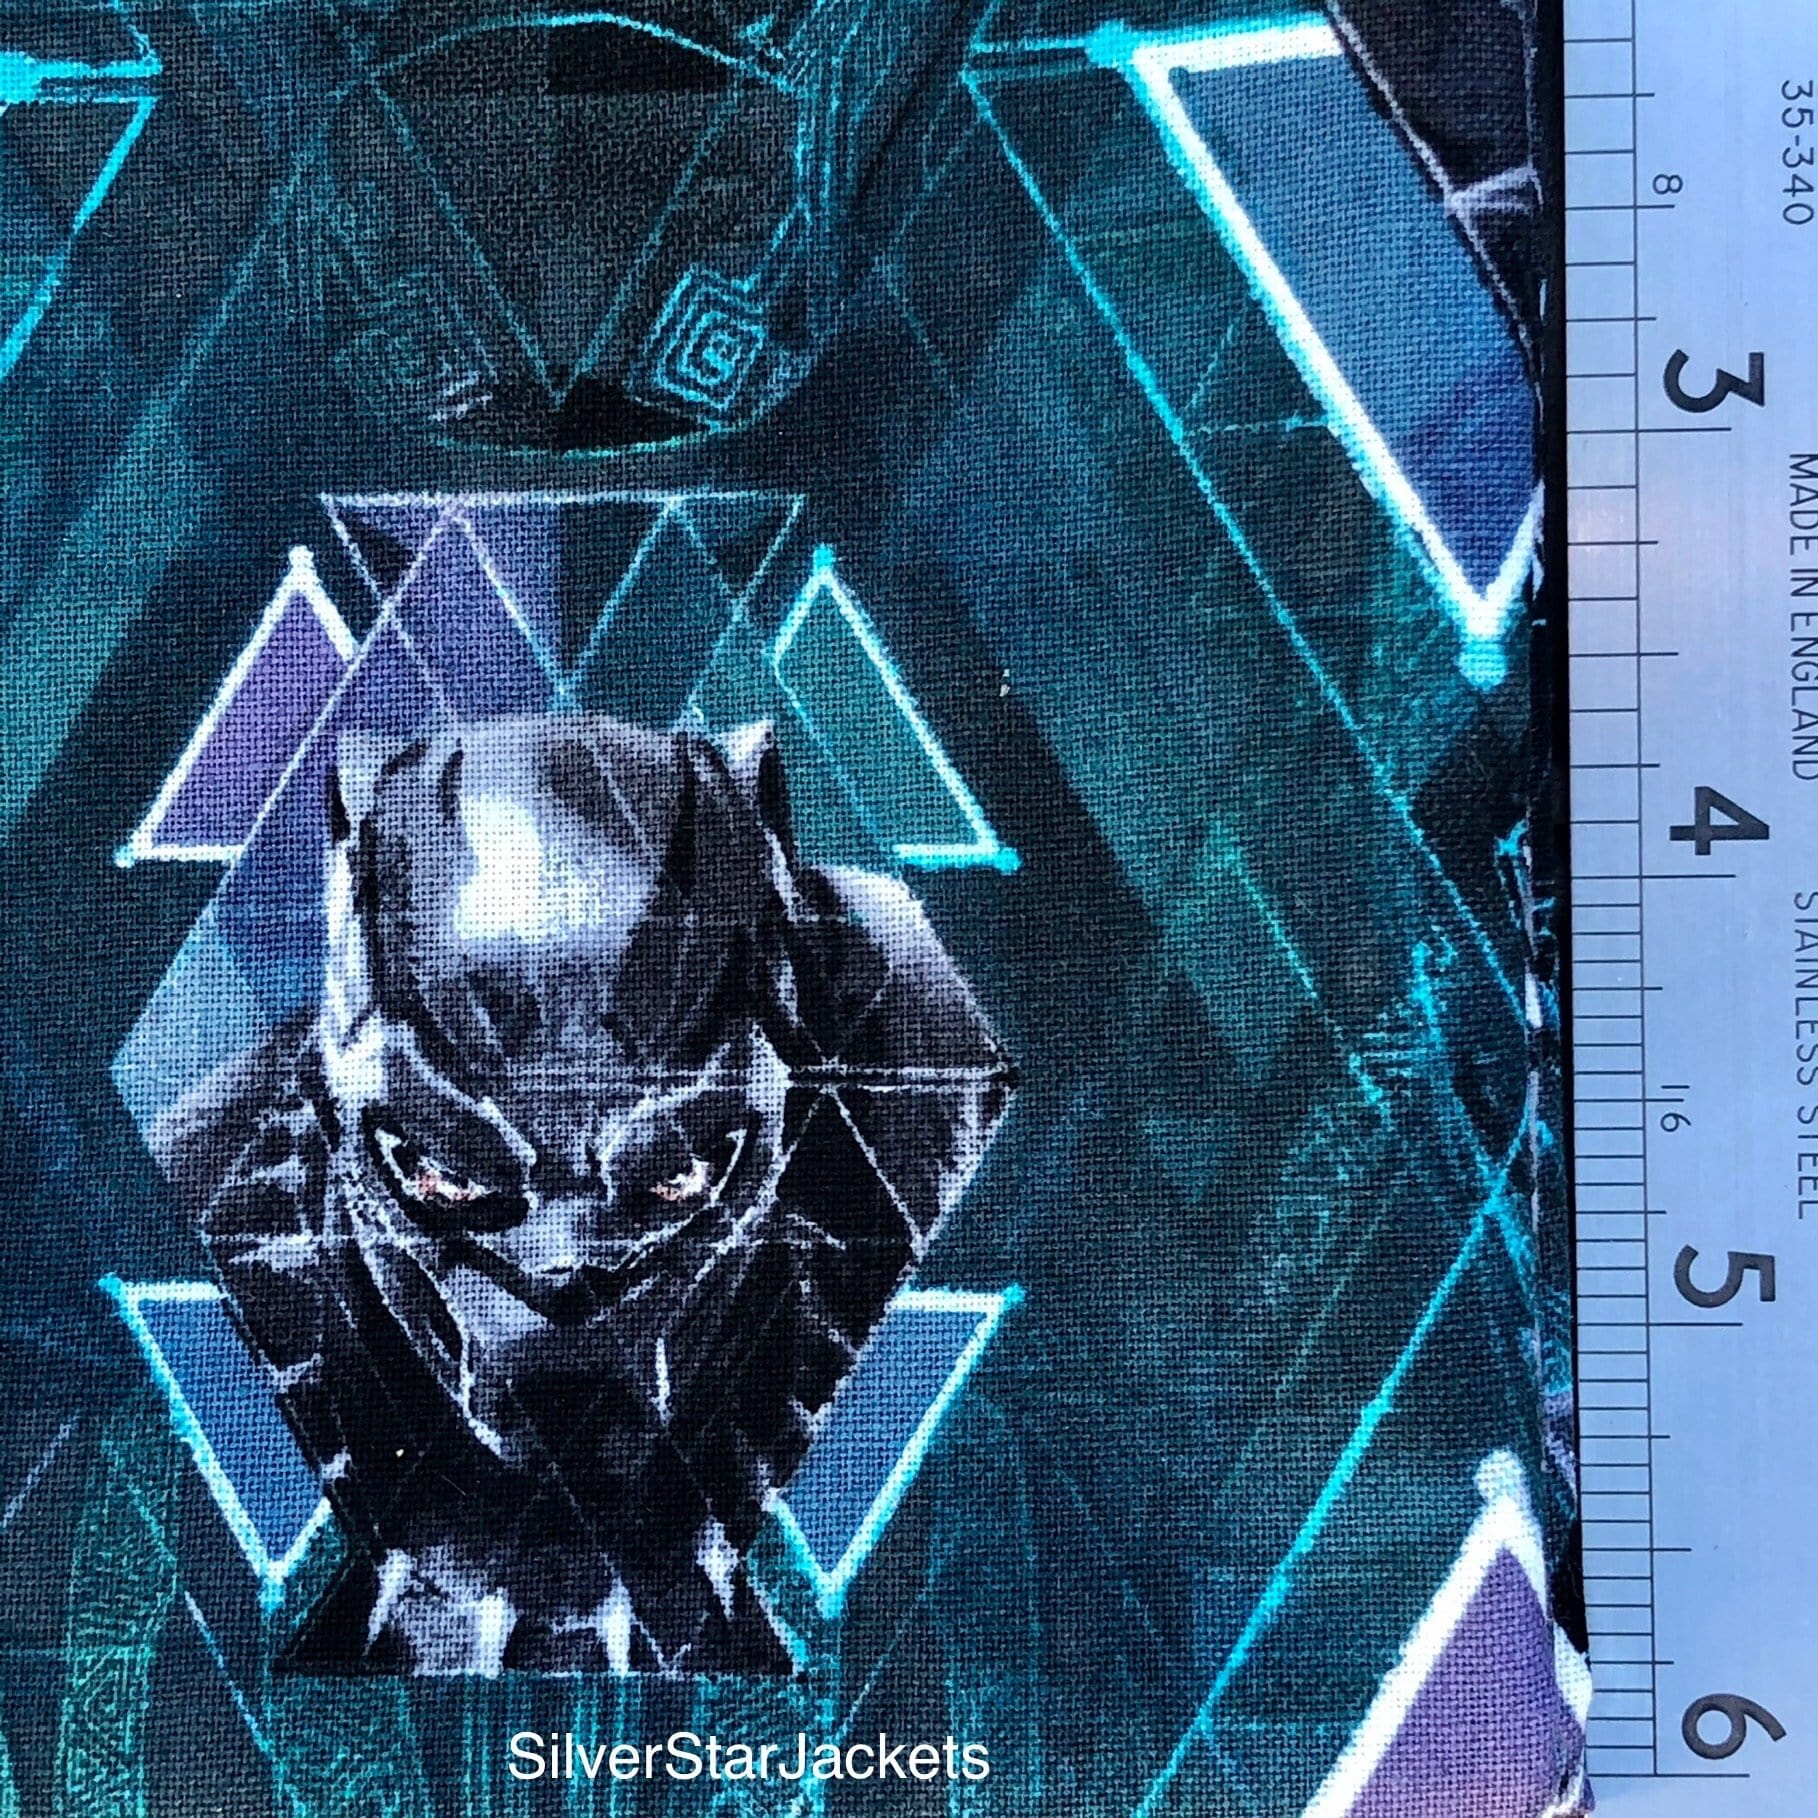 Marvel Black Panther Tossed Heads SuperHeroes 100% Cotton Fabric by the yard.